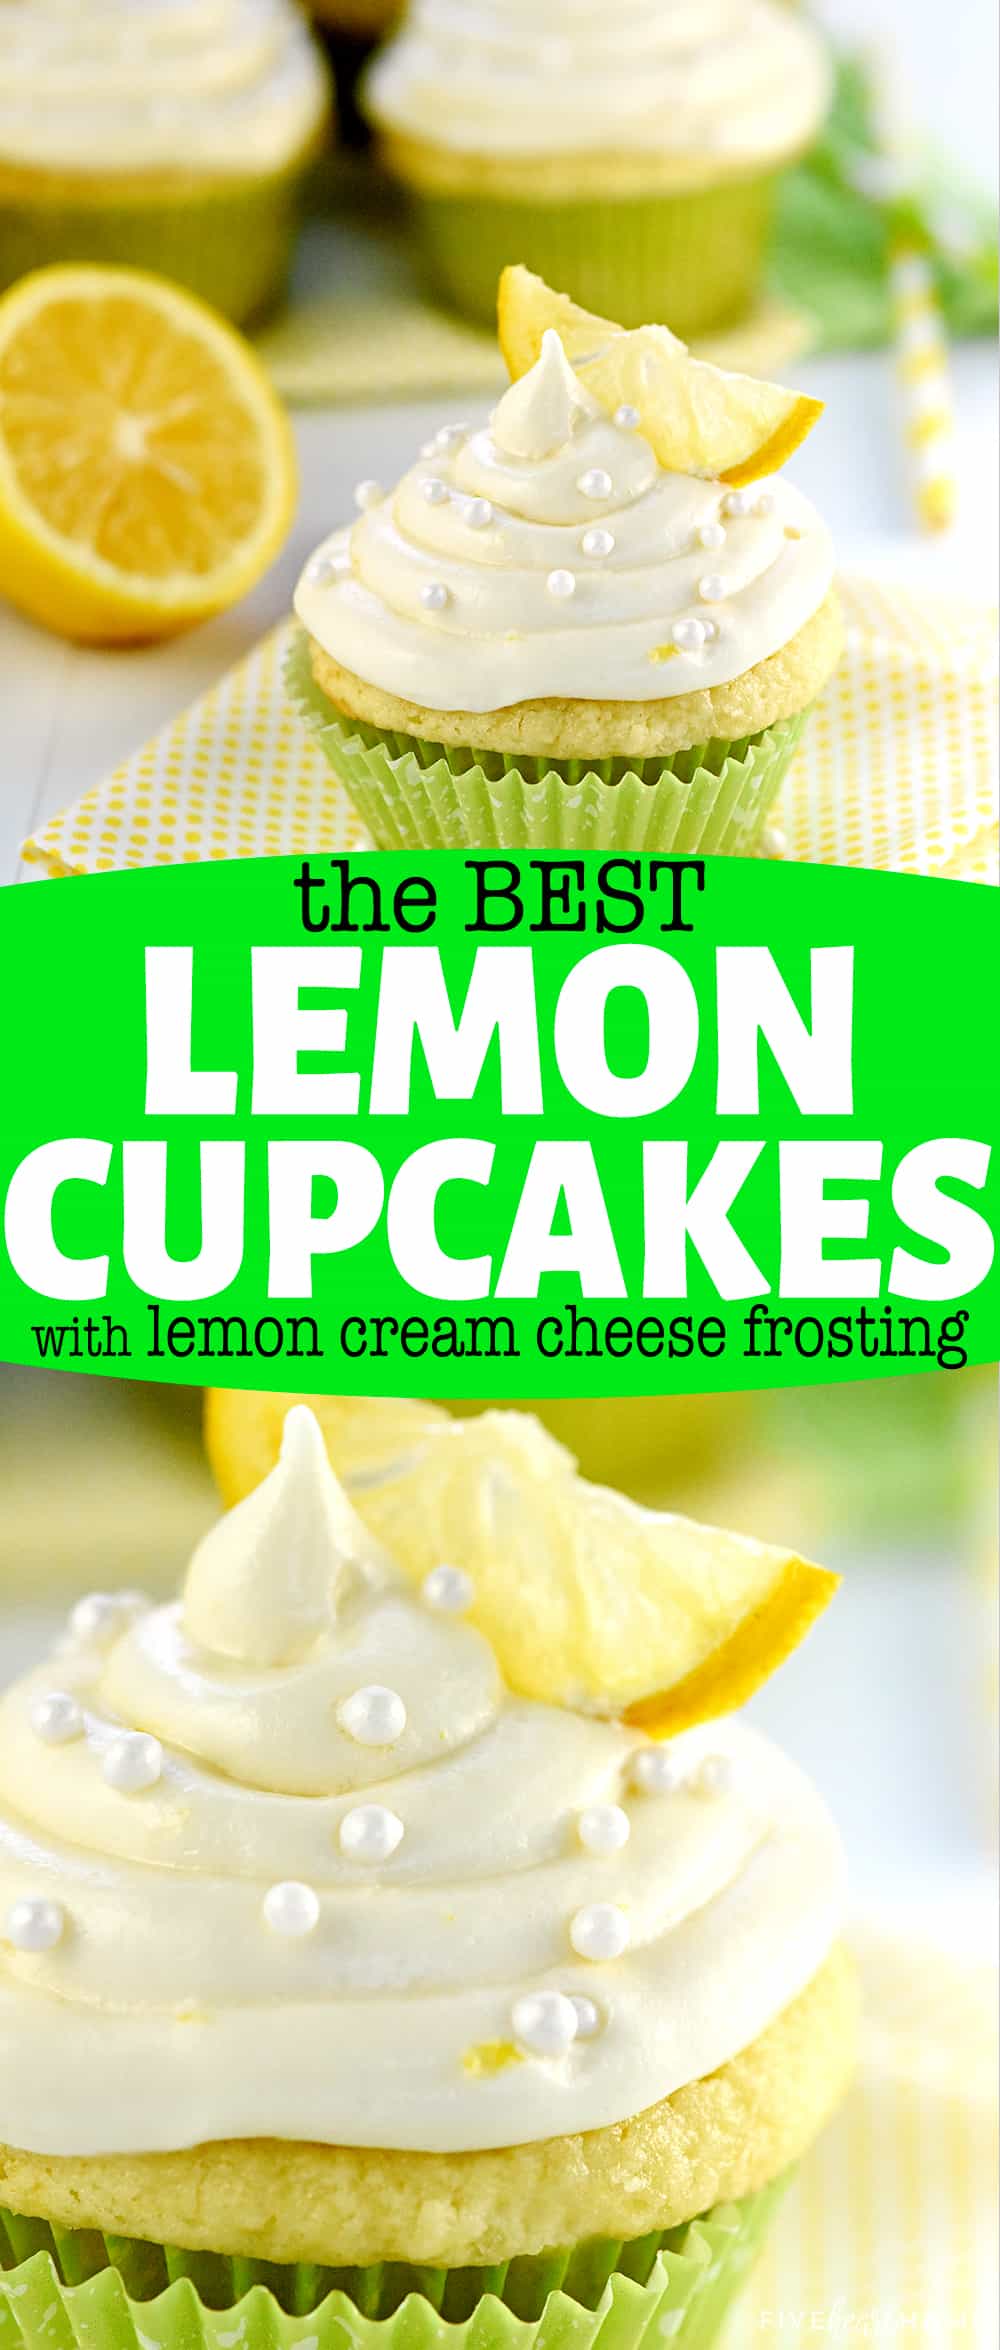 The BEST Lemon Cupcakes ~ start with a simple ONE-BOWL batter and end with a soaking of lemon simple syrup and a topping of fluffy Lemon Cream Cheese Frosting for luscious, lemony, perfectly moist treats! | FiveHeartHome.com via @fivehearthome